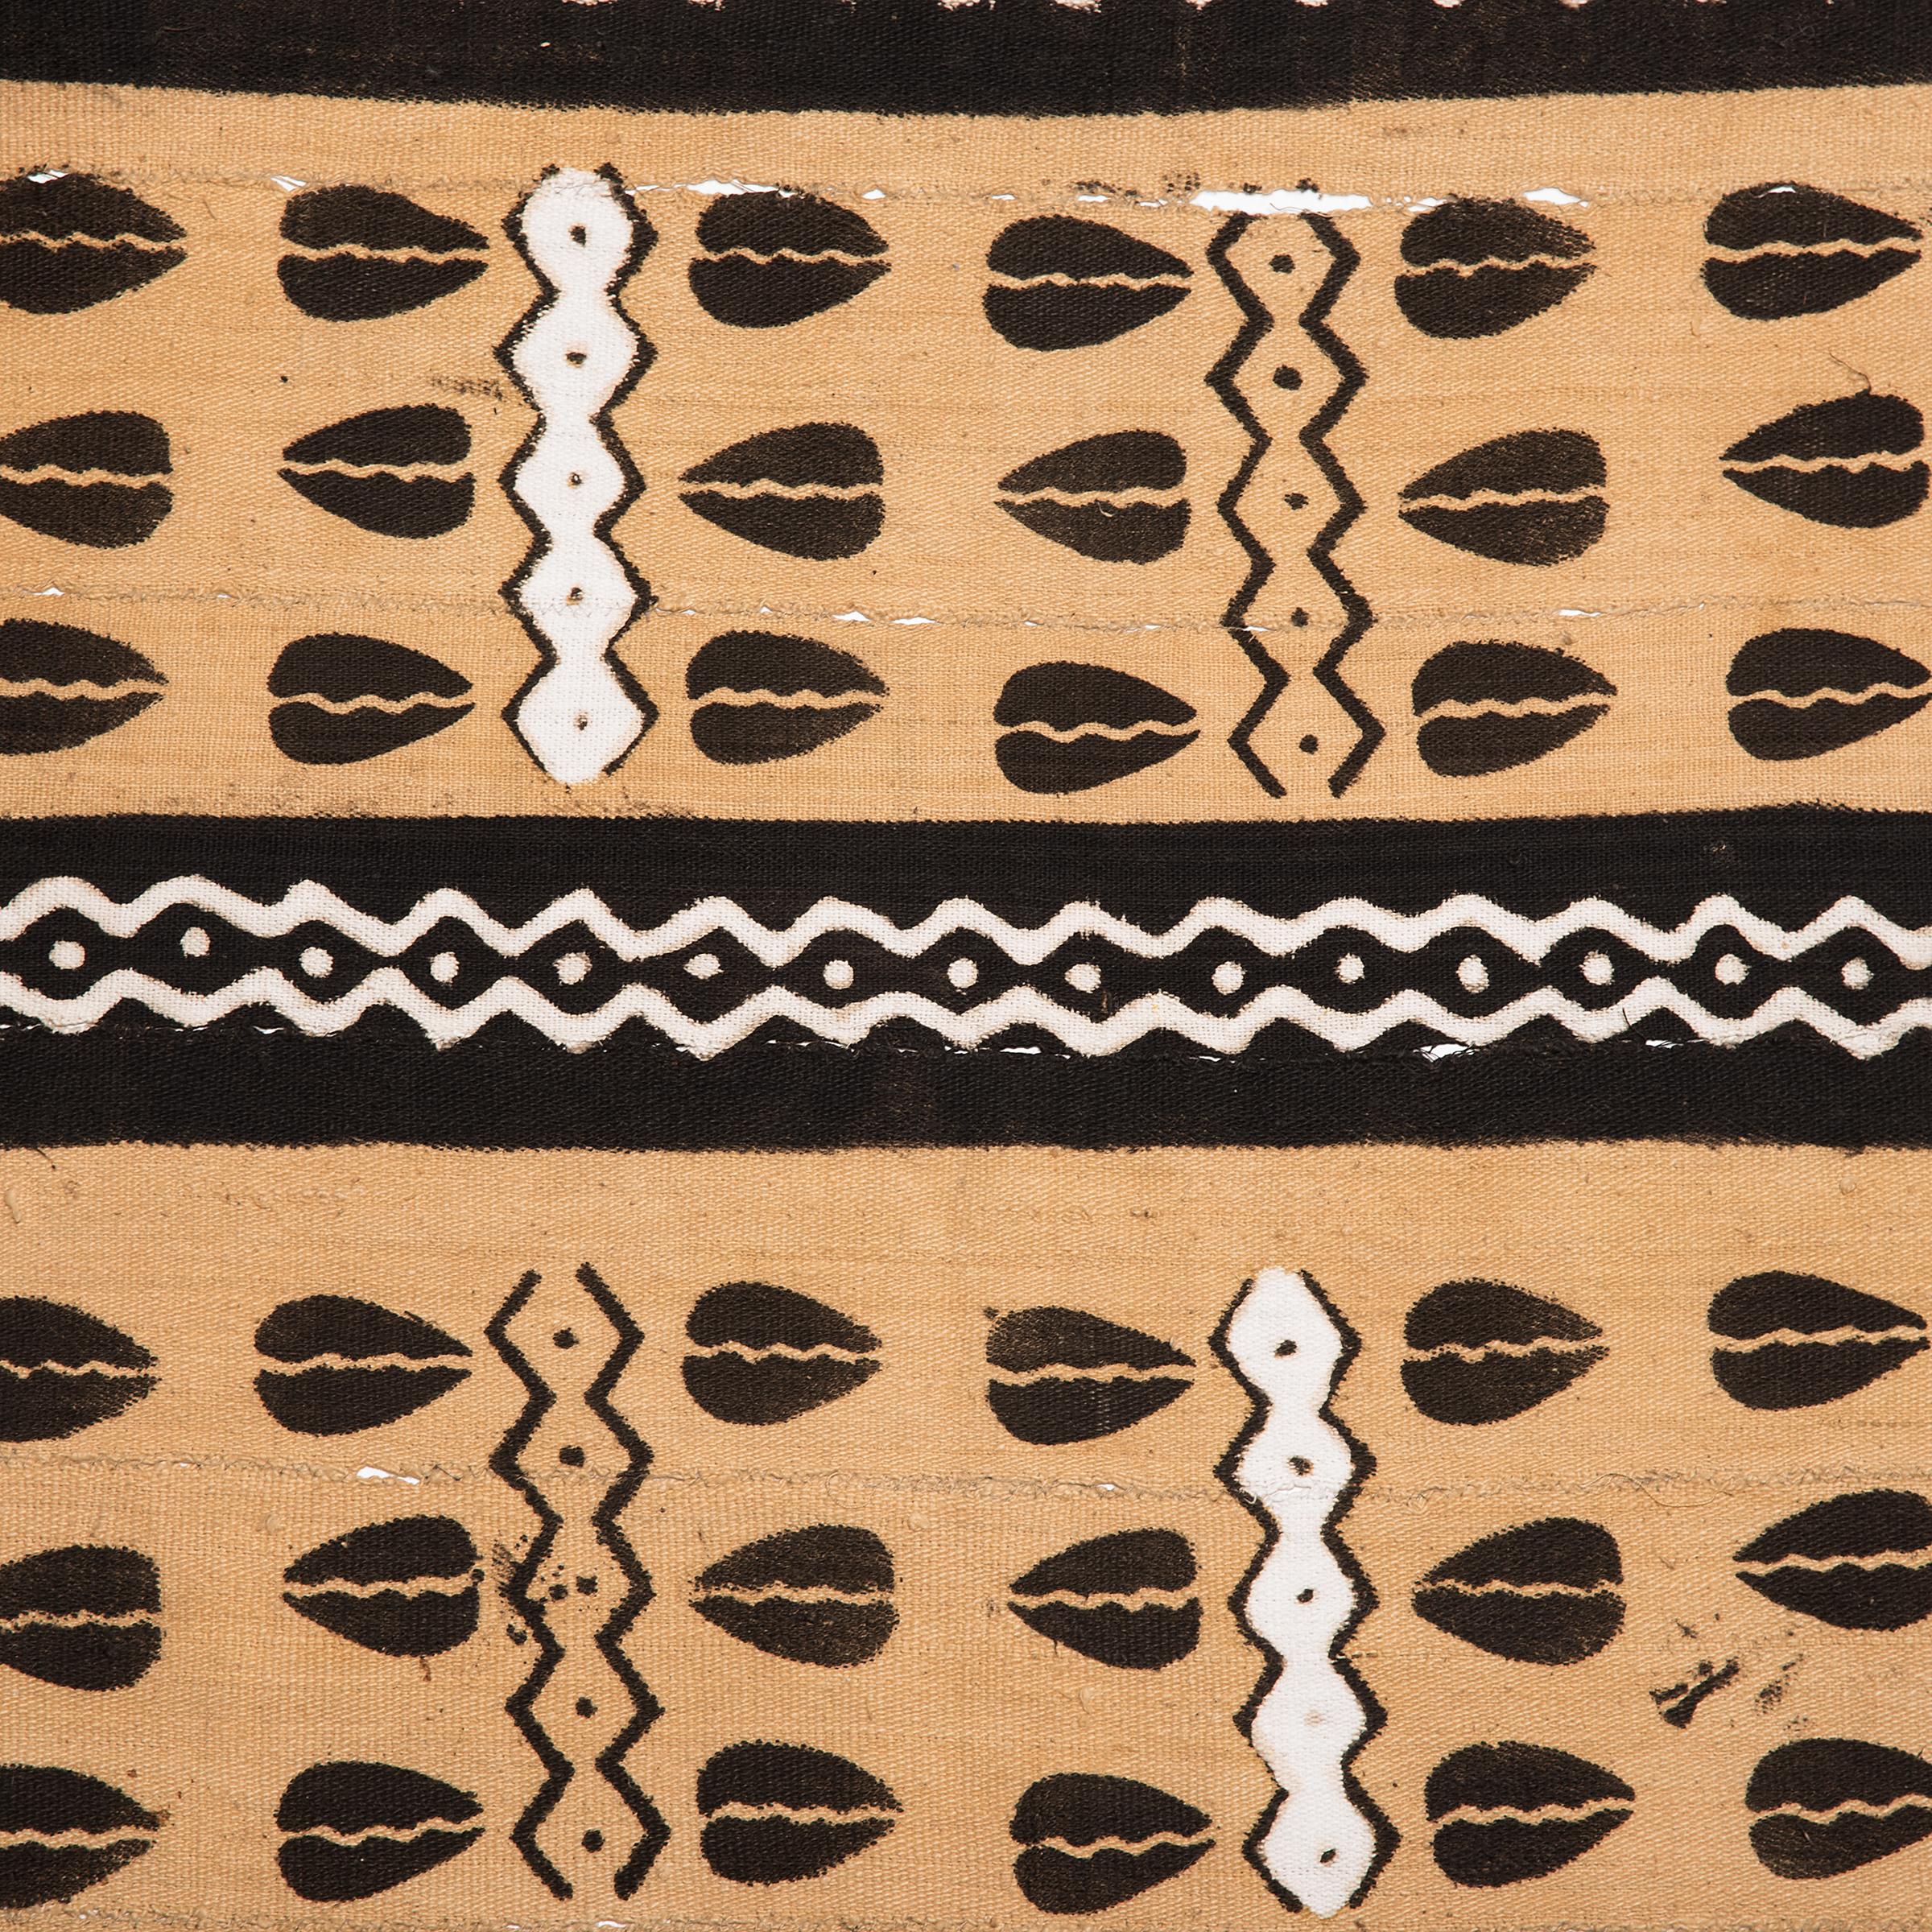 Commonly known as Bogolan or Bògòlanfini, this cotton textile was hand spun, handwoven, then dyed through a technique that has been passed down in the Bamana region of Mali for centuries. In traditional Malian culture, Bogolan, or mudcloth, is worn